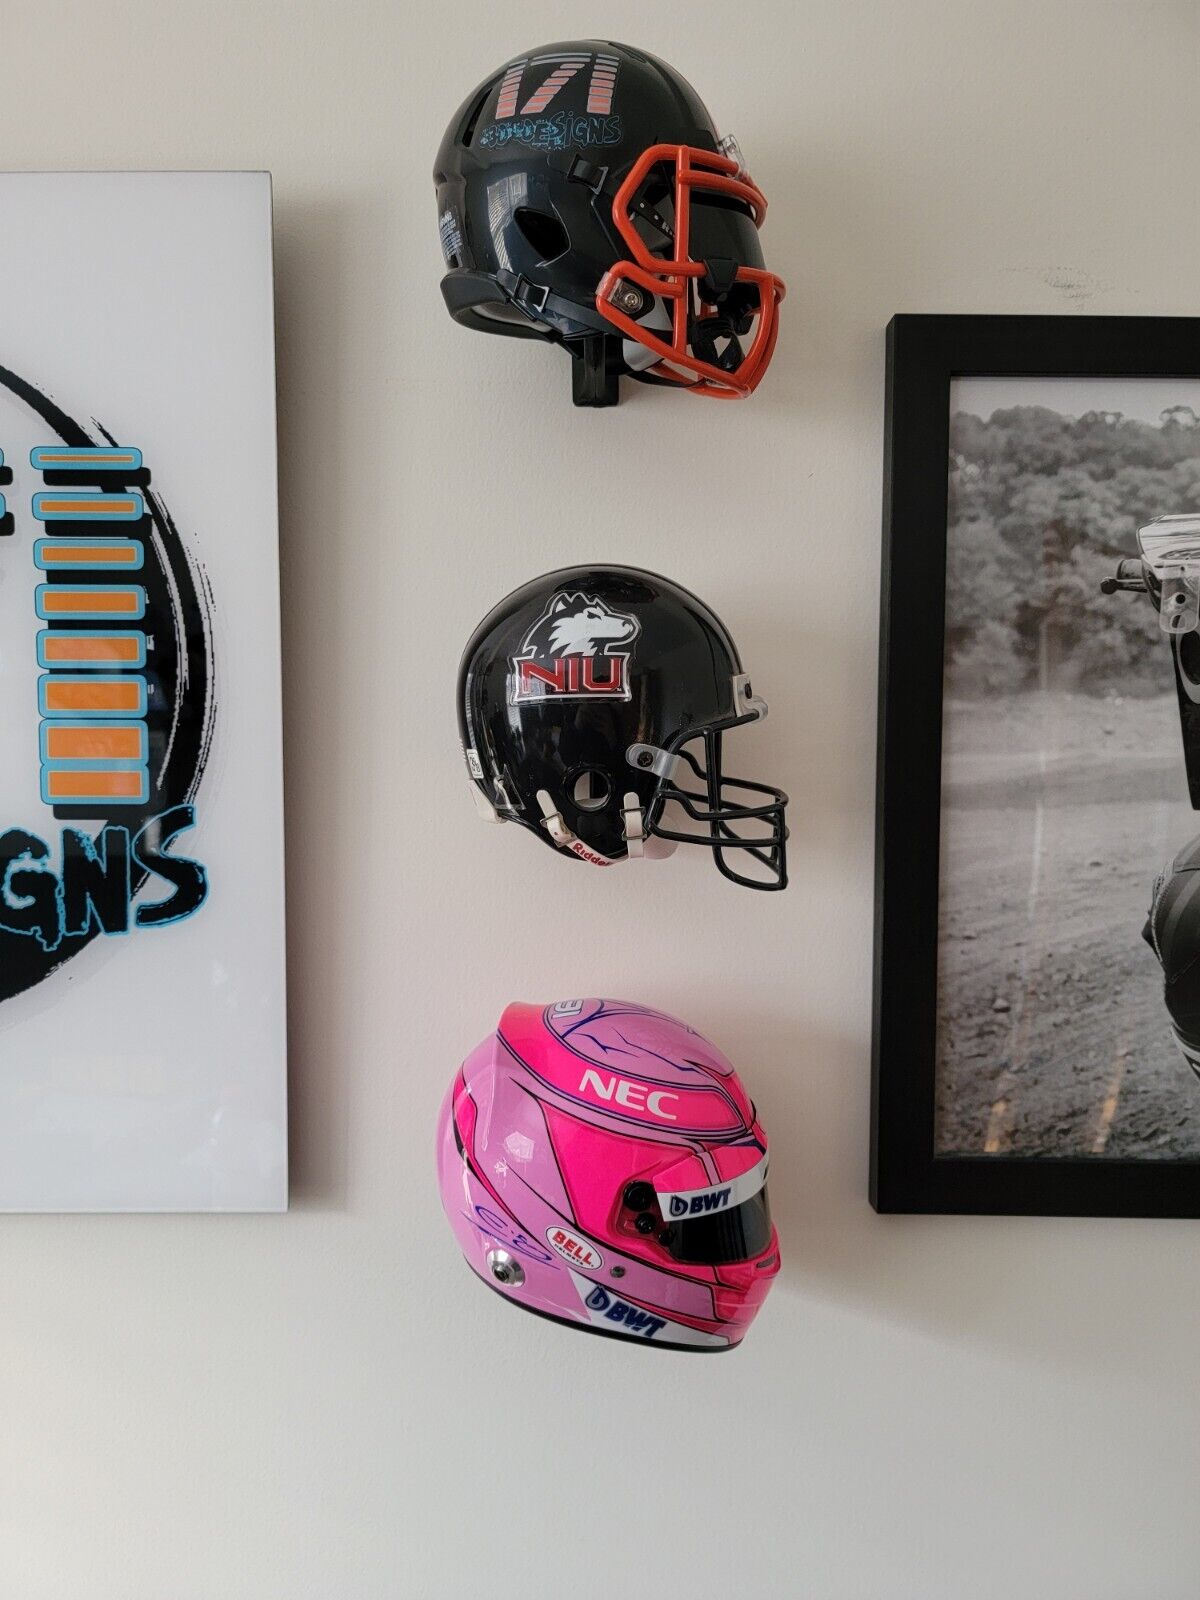 F1 1/2 Scale helmet wall hanger.  3d printed from PLA+, display holder, mount